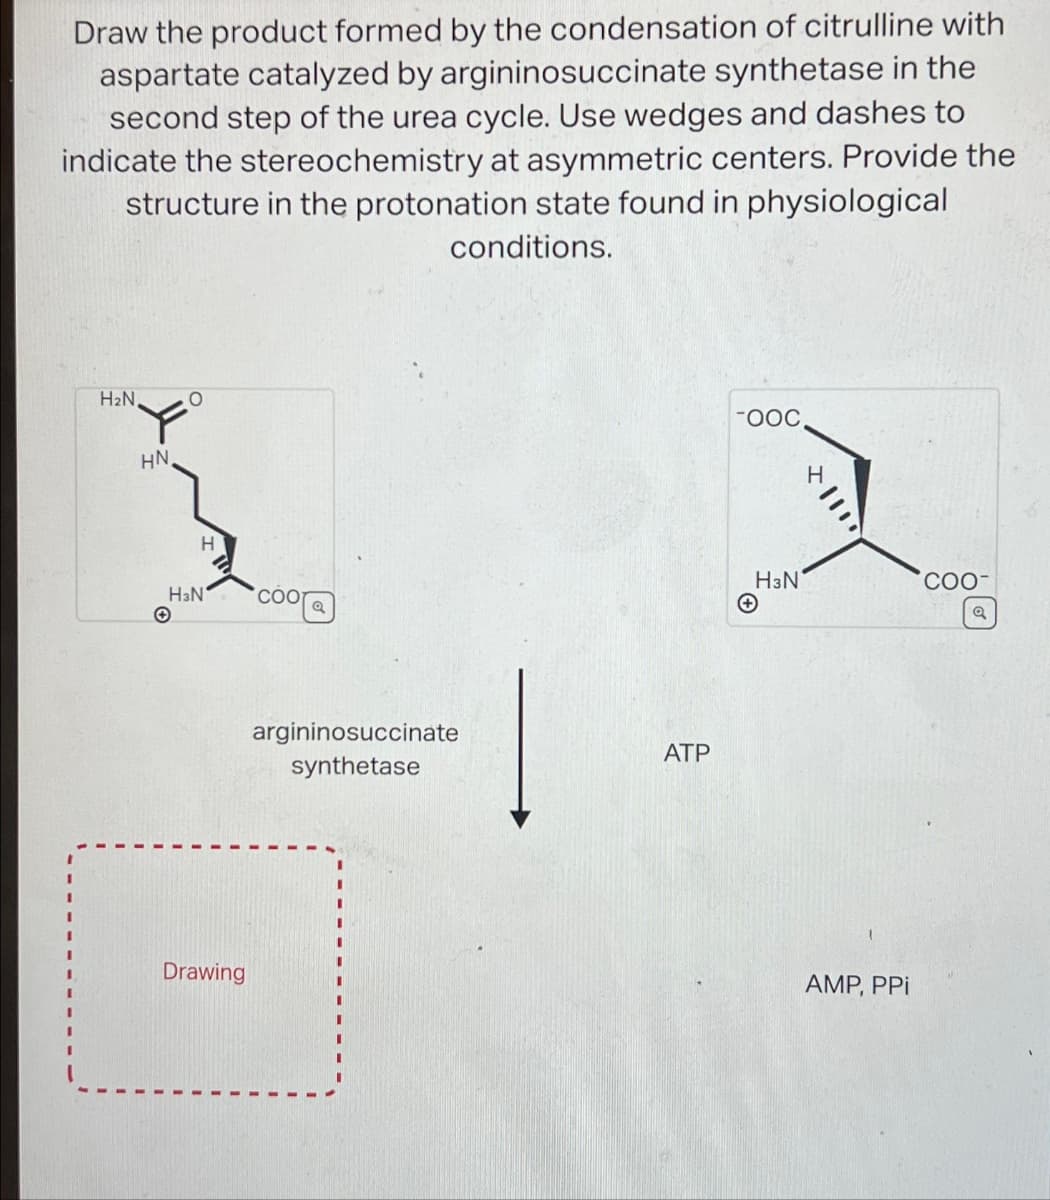 Draw the product formed by the condensation of citrulline with
aspartate catalyzed by argininosuccinate synthetase in the
second step of the urea cycle. Use wedges and dashes to
indicate the stereochemistry at asymmetric centers. Provide the
structure in the protonation state found in physiological
conditions.
H₂N
HN,
O
O
H
H3N
Drawing
Coola
argininosuccinate
synthetase
ATP
-OOC,
H3N
H
1110
AMP, PPi
COO-
Q